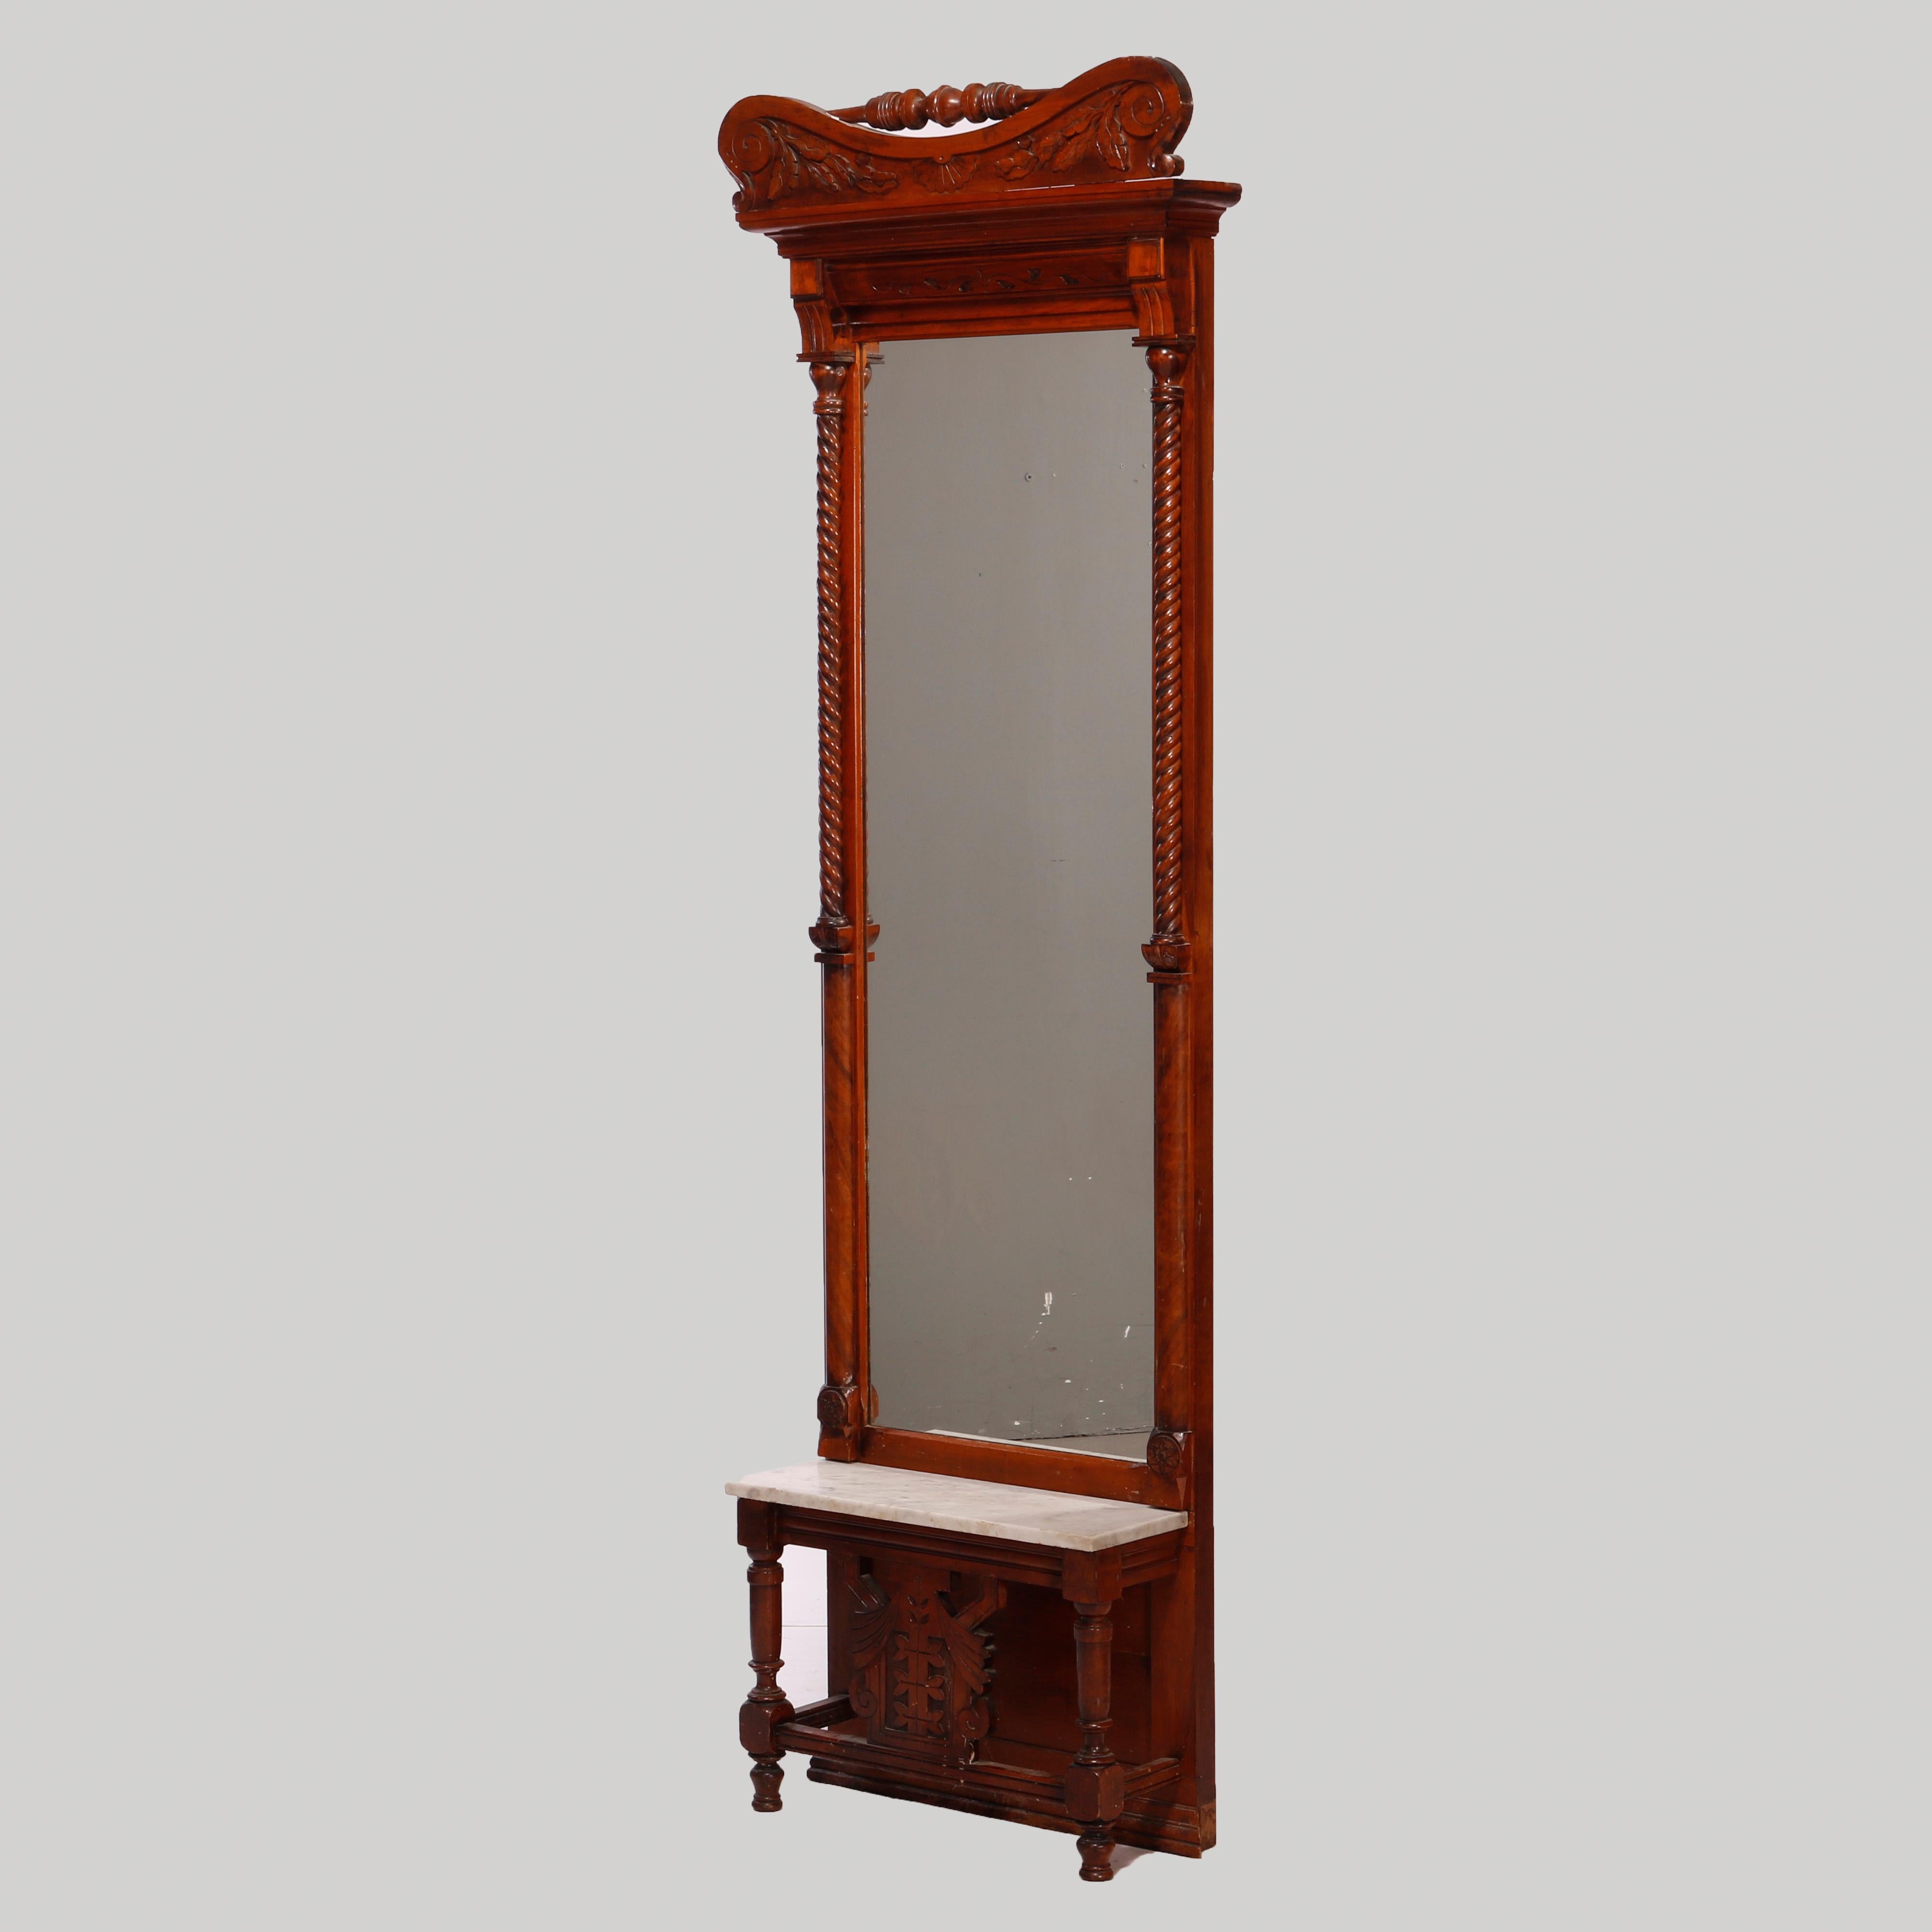 An antique Renaissance Revival pier mirror offers walnut and burl construction with foliate carved crest and turned column stretcher over full length mirror seated on marble top base with incised decoration, c1880

Measures - 92.5''H X 26.75''W X